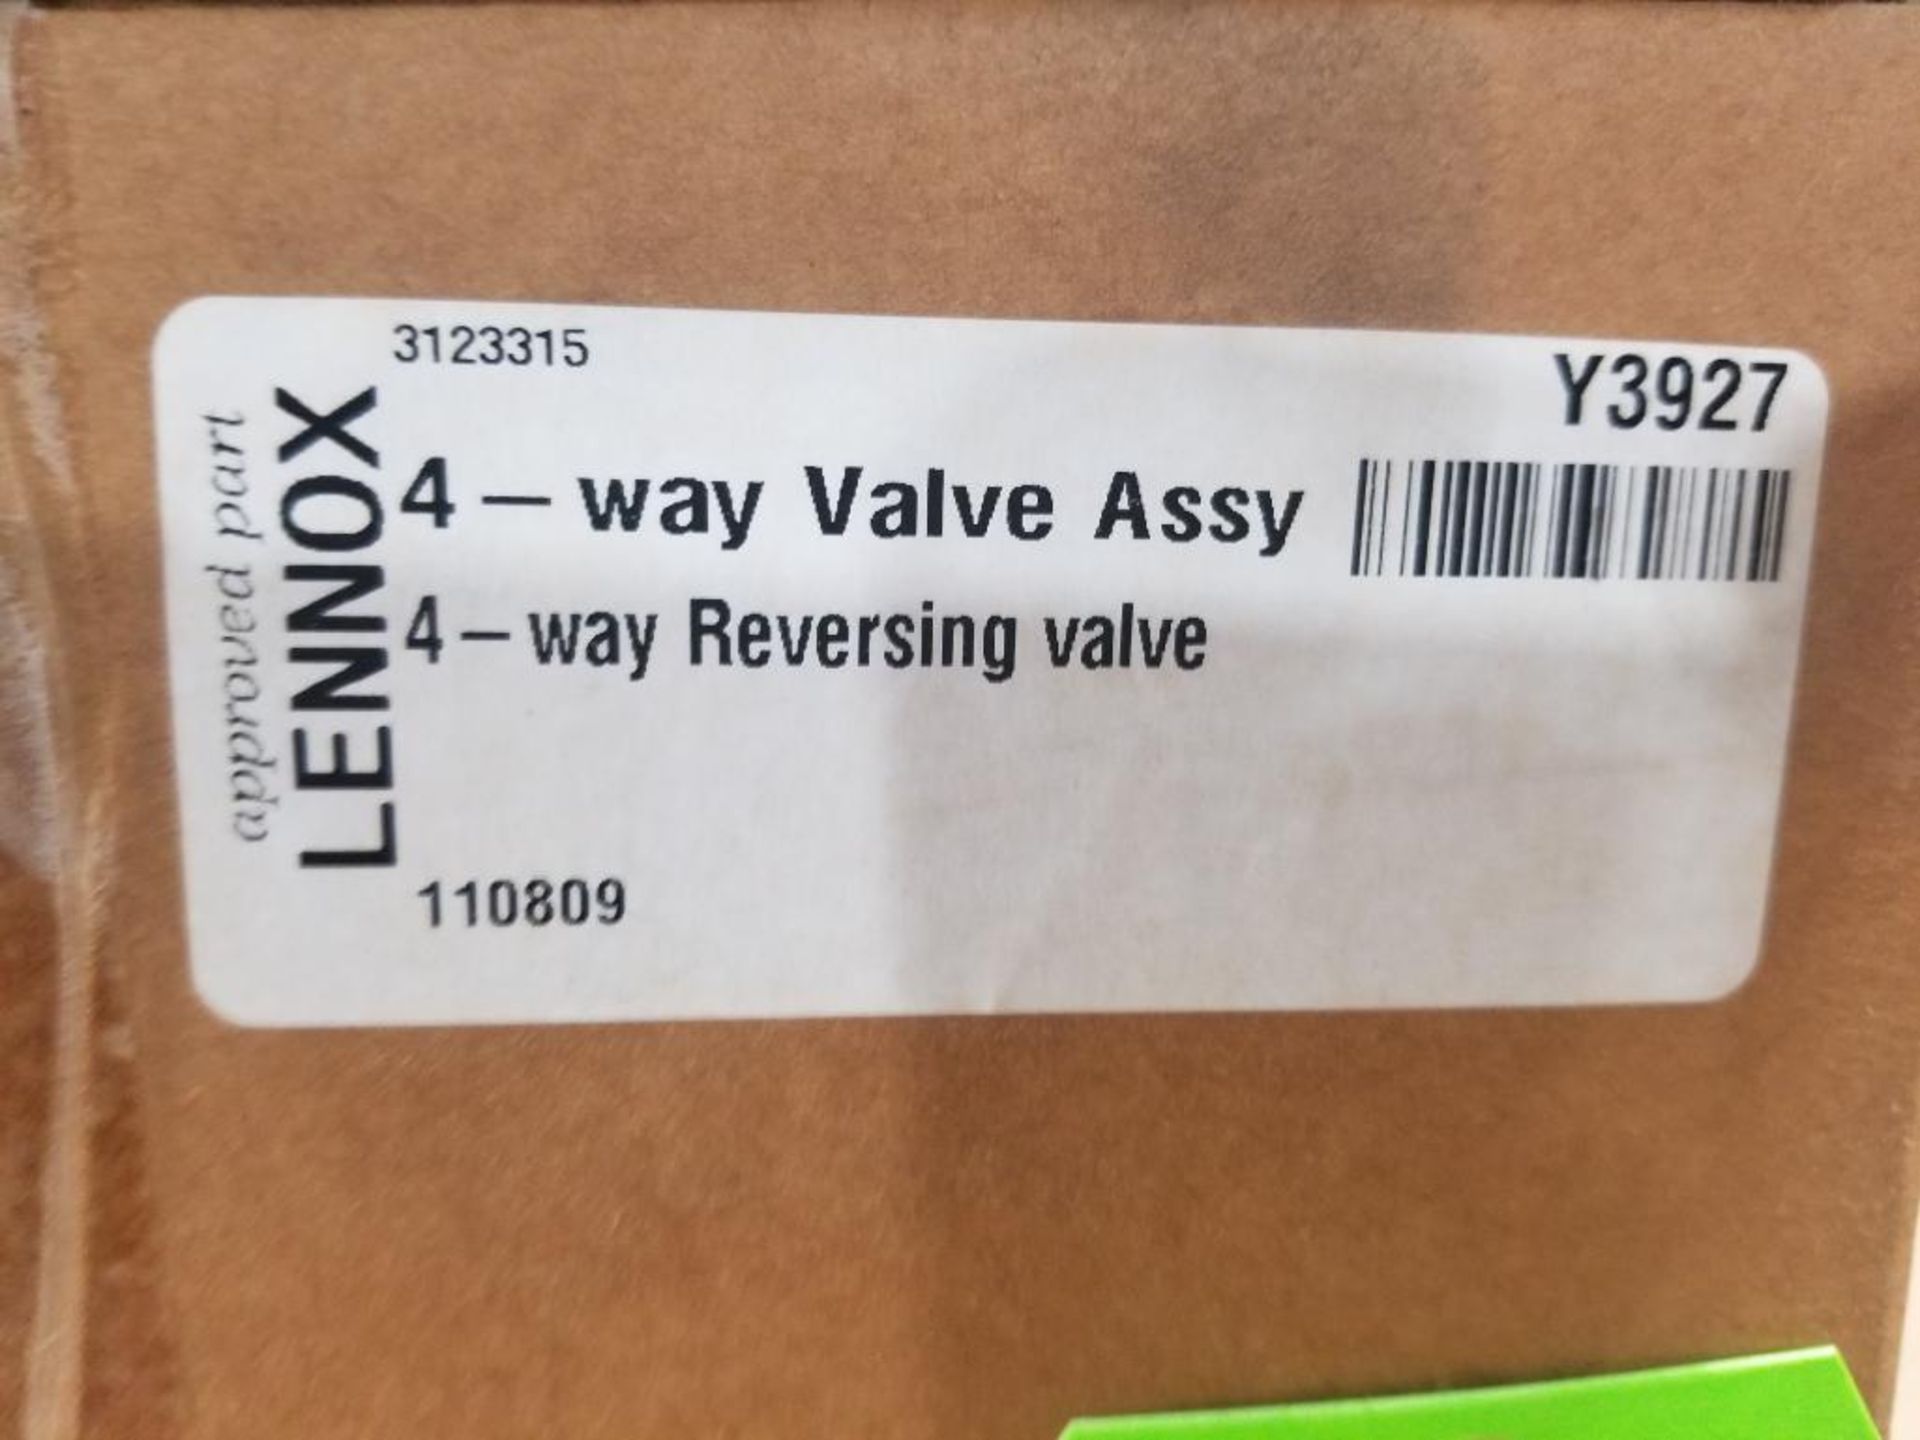 Qty 2 - Lennox 4-way valve assembly. Part number Y3927. - Image 2 of 5